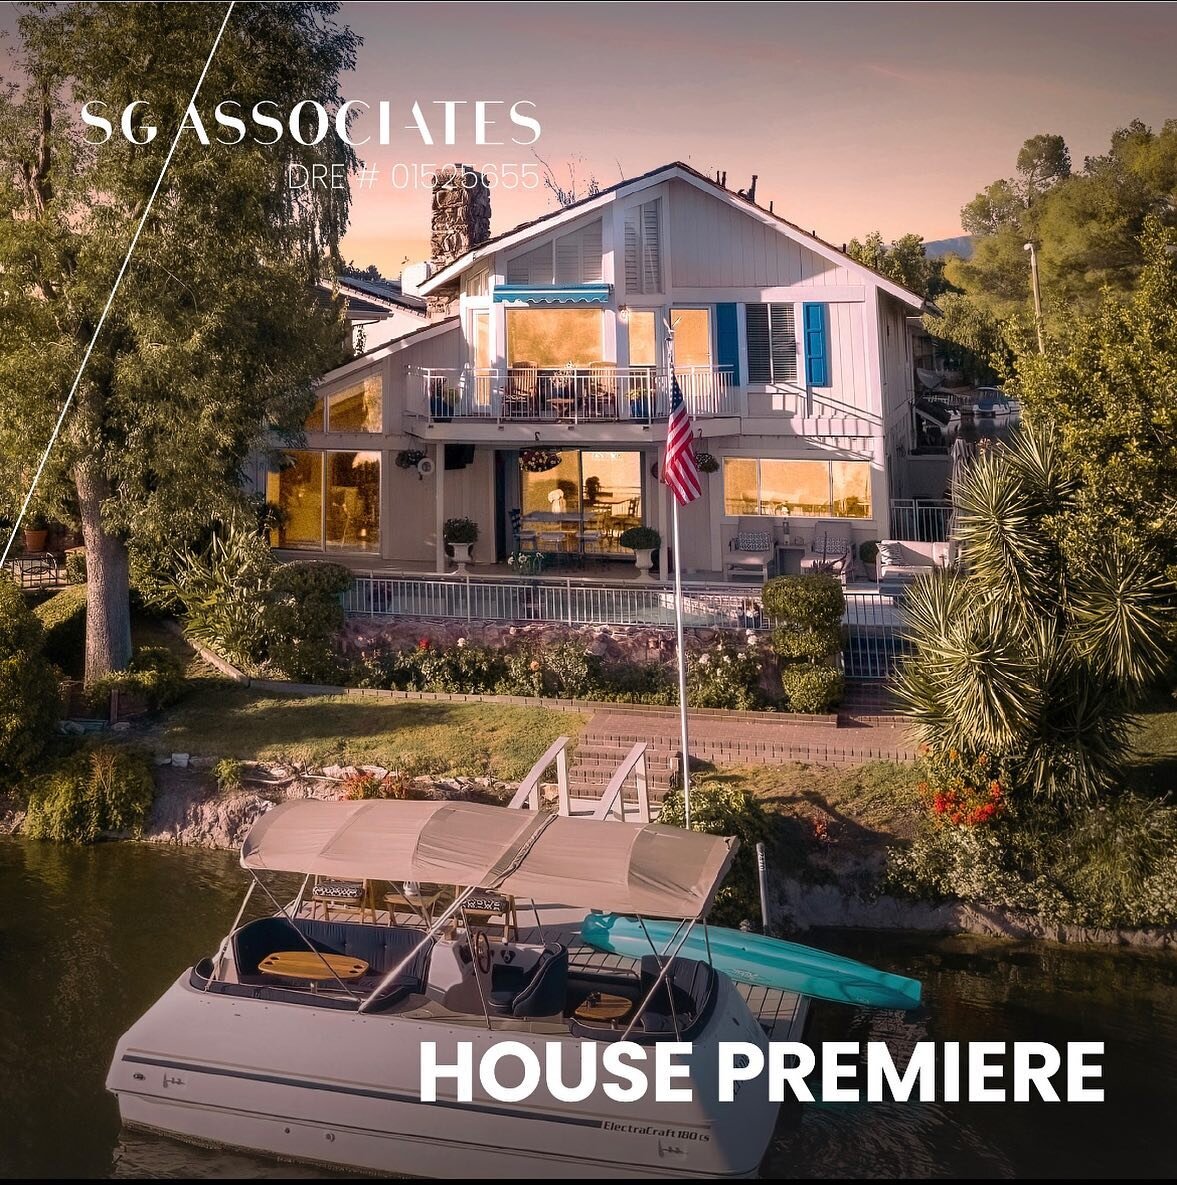 🔜🏡 Join us for one of our House Premieres this Saturday 6/18 from 5-7pm! ⌛ Make the great escape to the beautiful Westlake Island for a Lake Soir&eacute;e with appetizers, drinks, and fabulous views on the Lake courtesy of SG Associates! 🥂⛵🌅 Watc